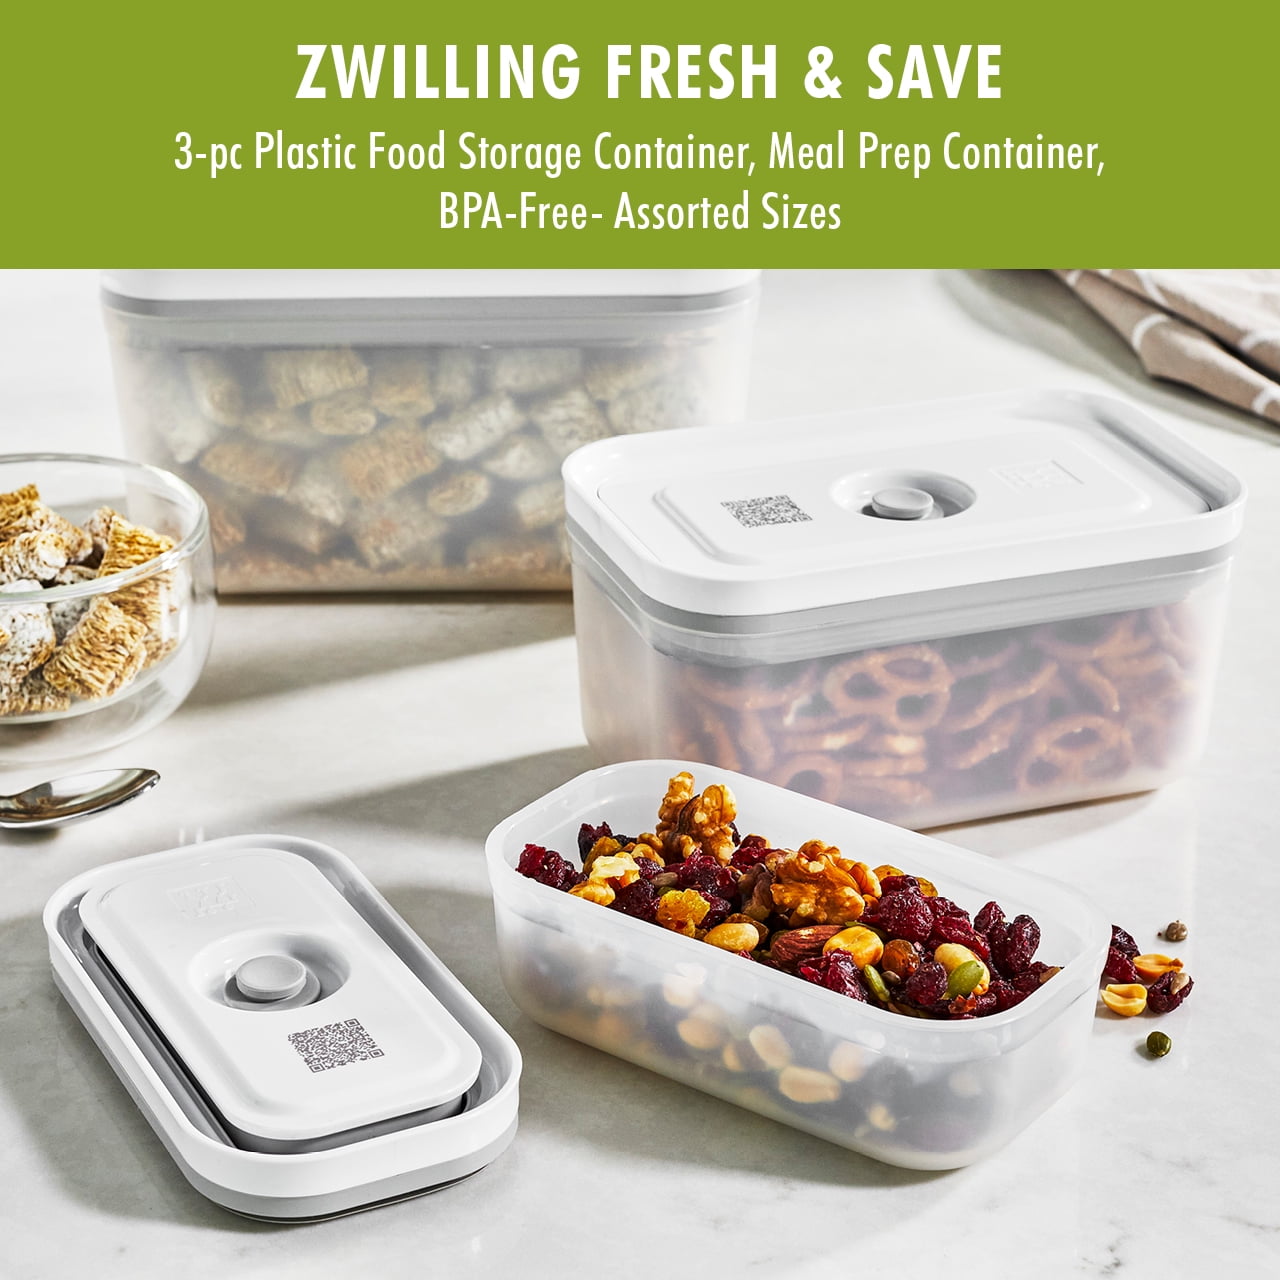 Zwilling Fresh & Save 3-pc Plastic Vacuum Food Storage Containers